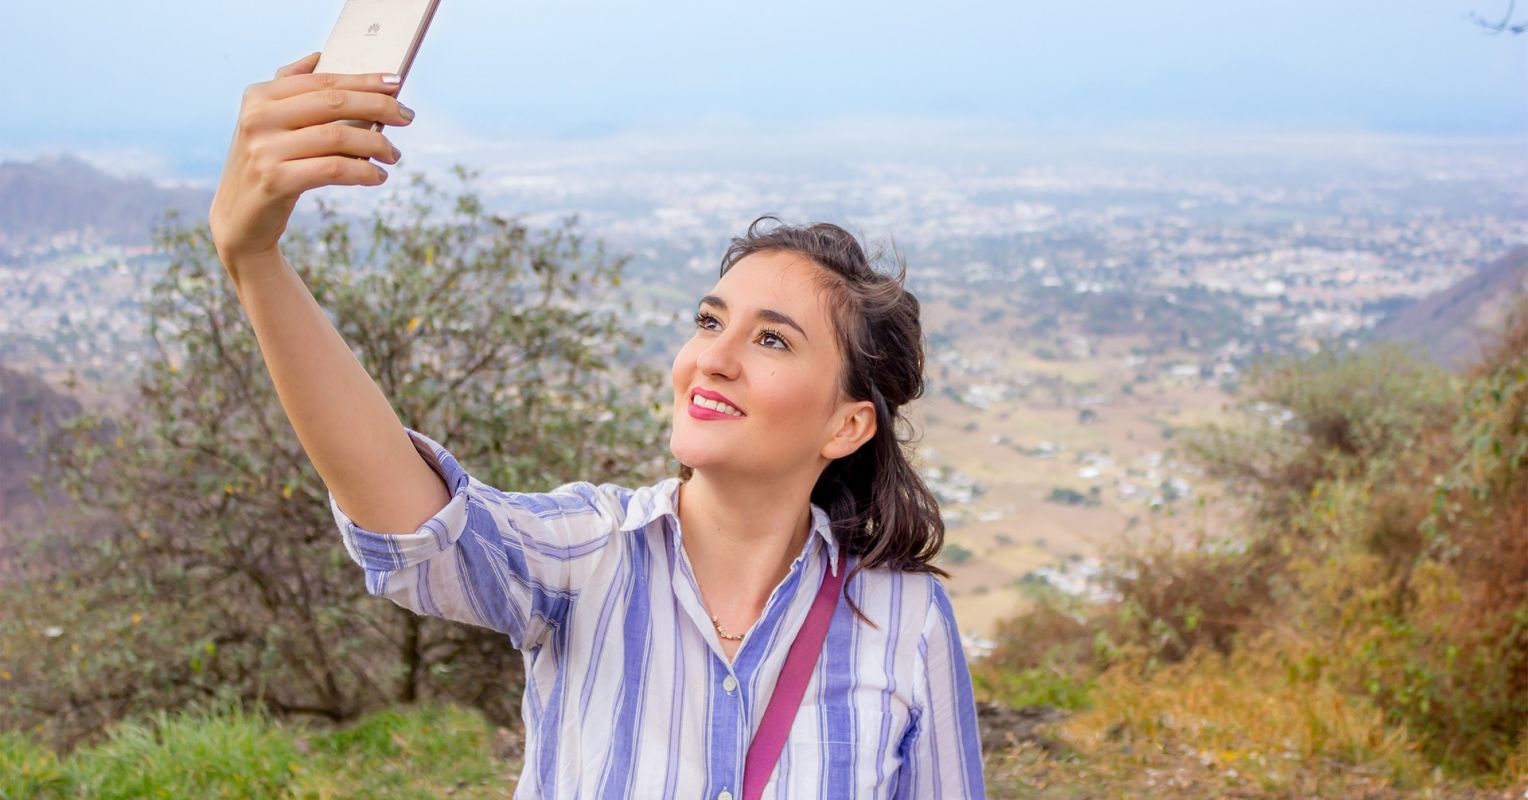 Why Do People Take Selfies? | Psychology Today United Kingdom